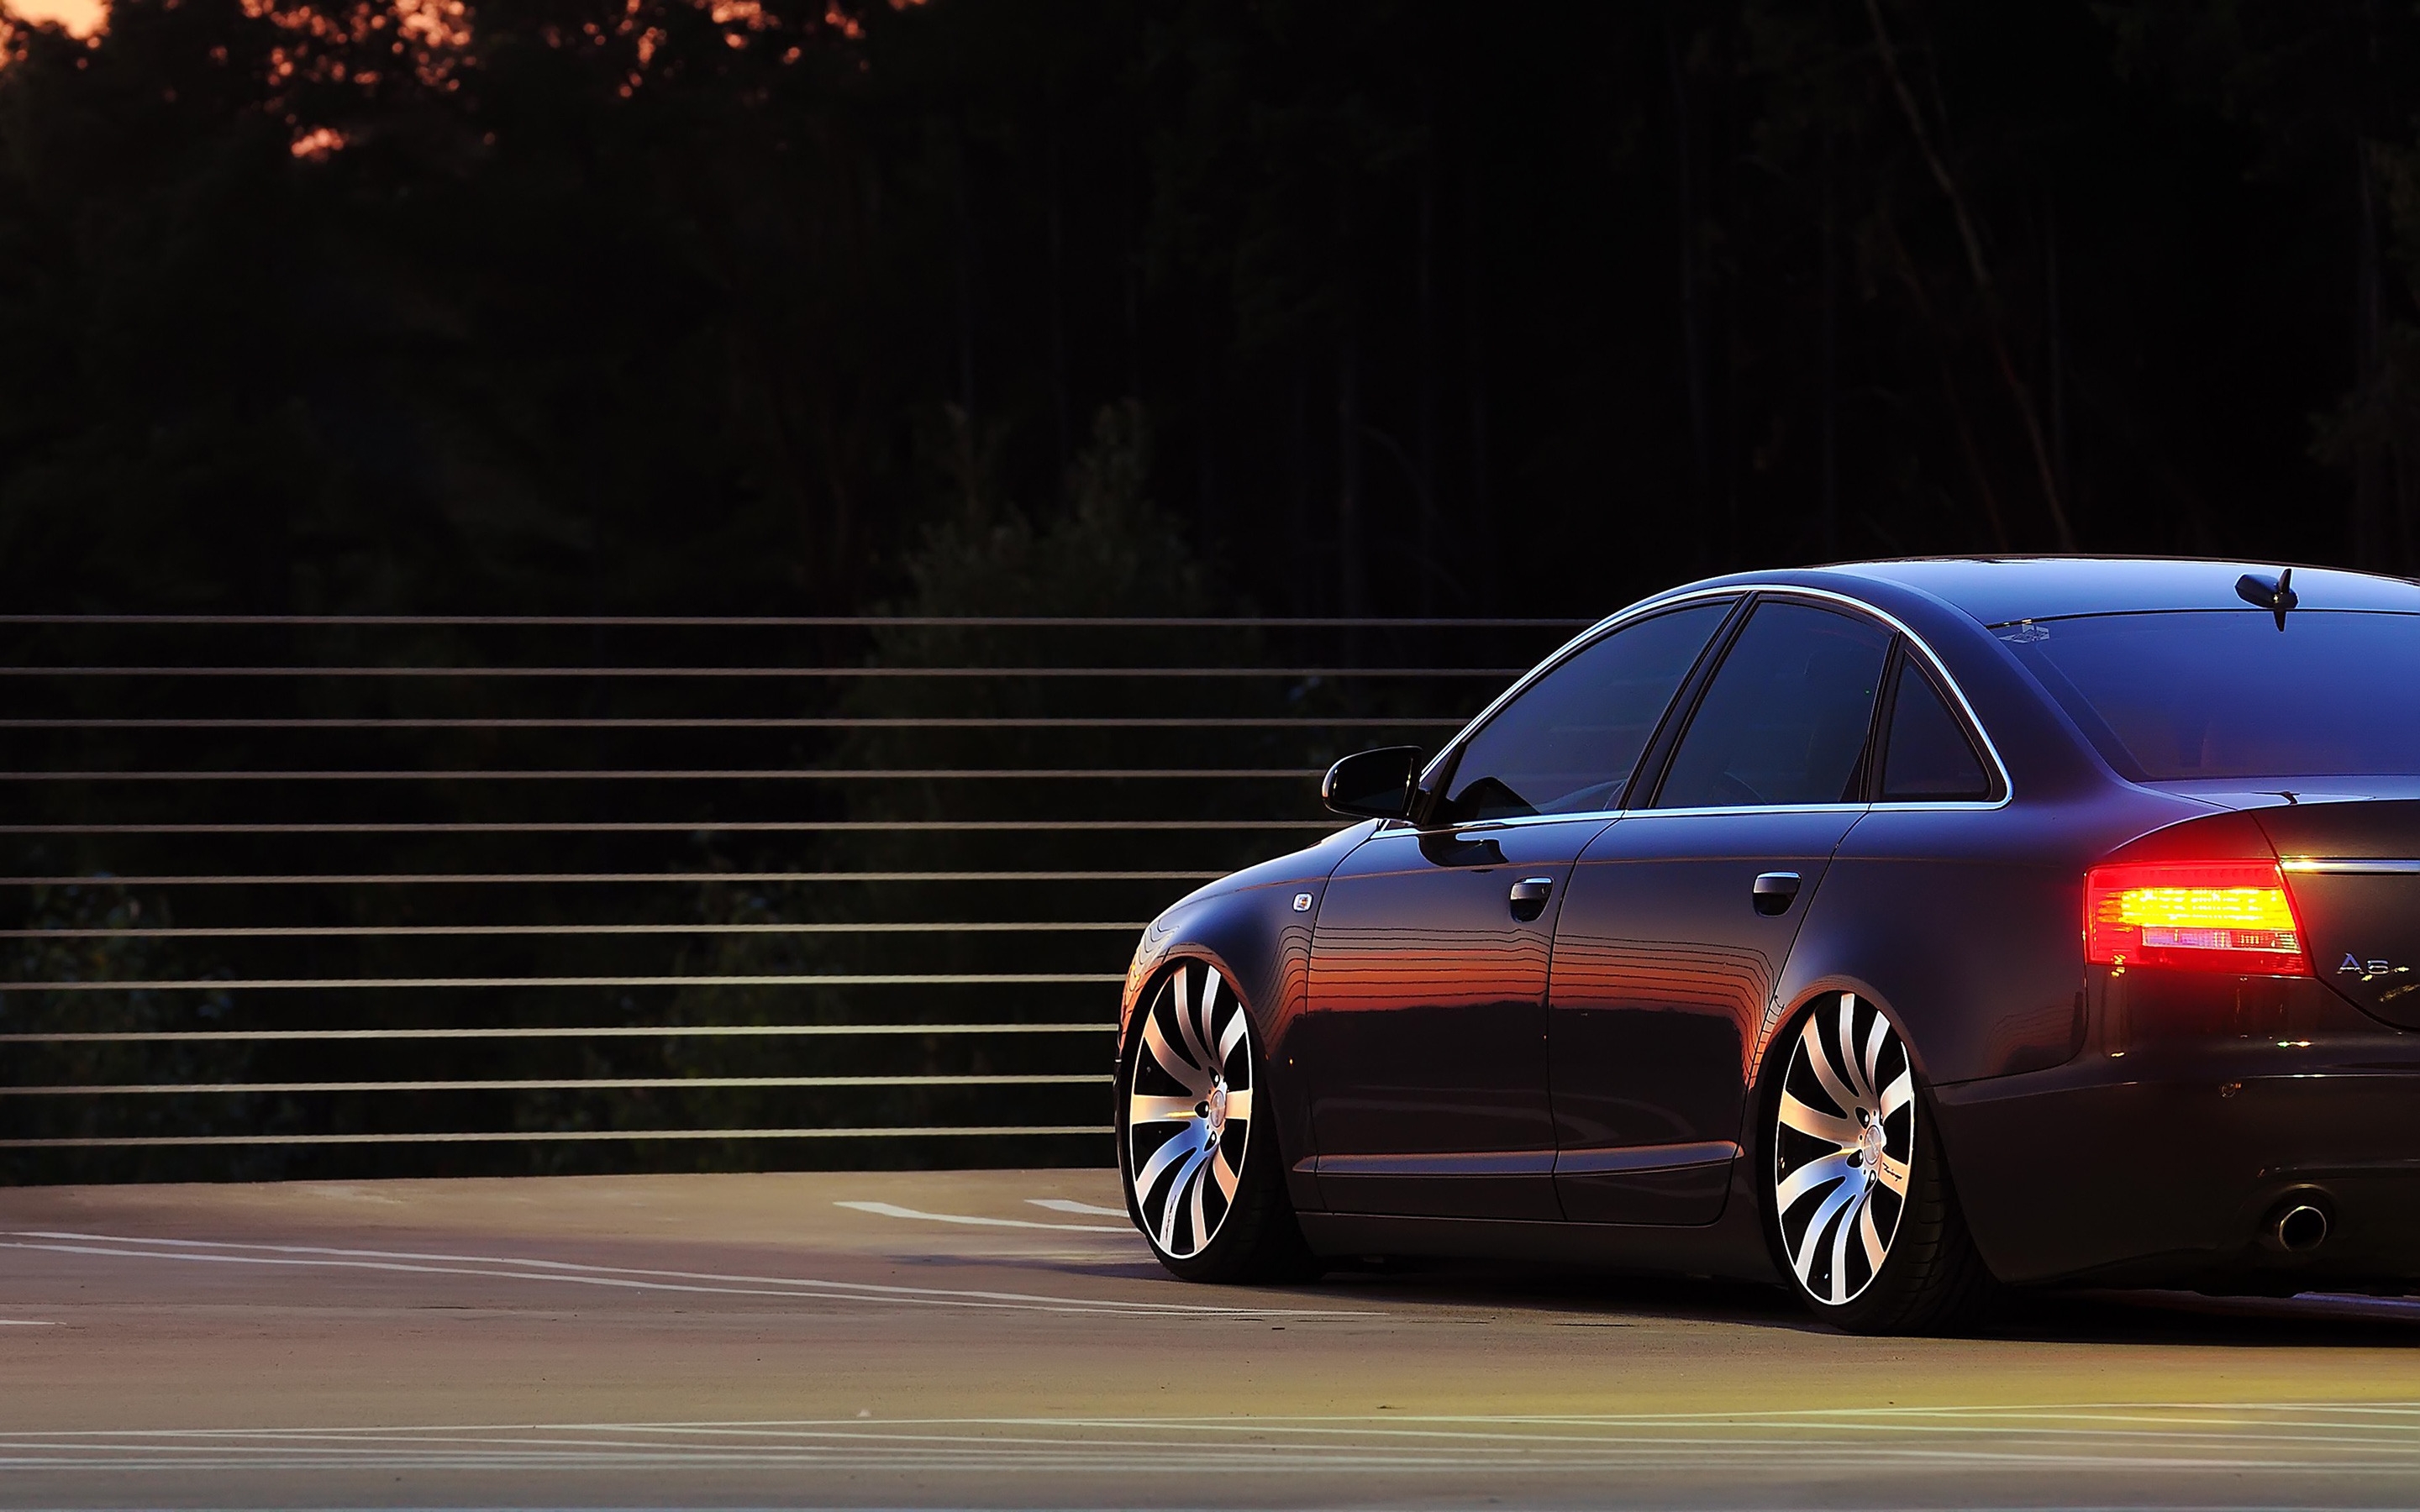 Audi A6 Tuned for 2880 x 1800 Retina Display resolution